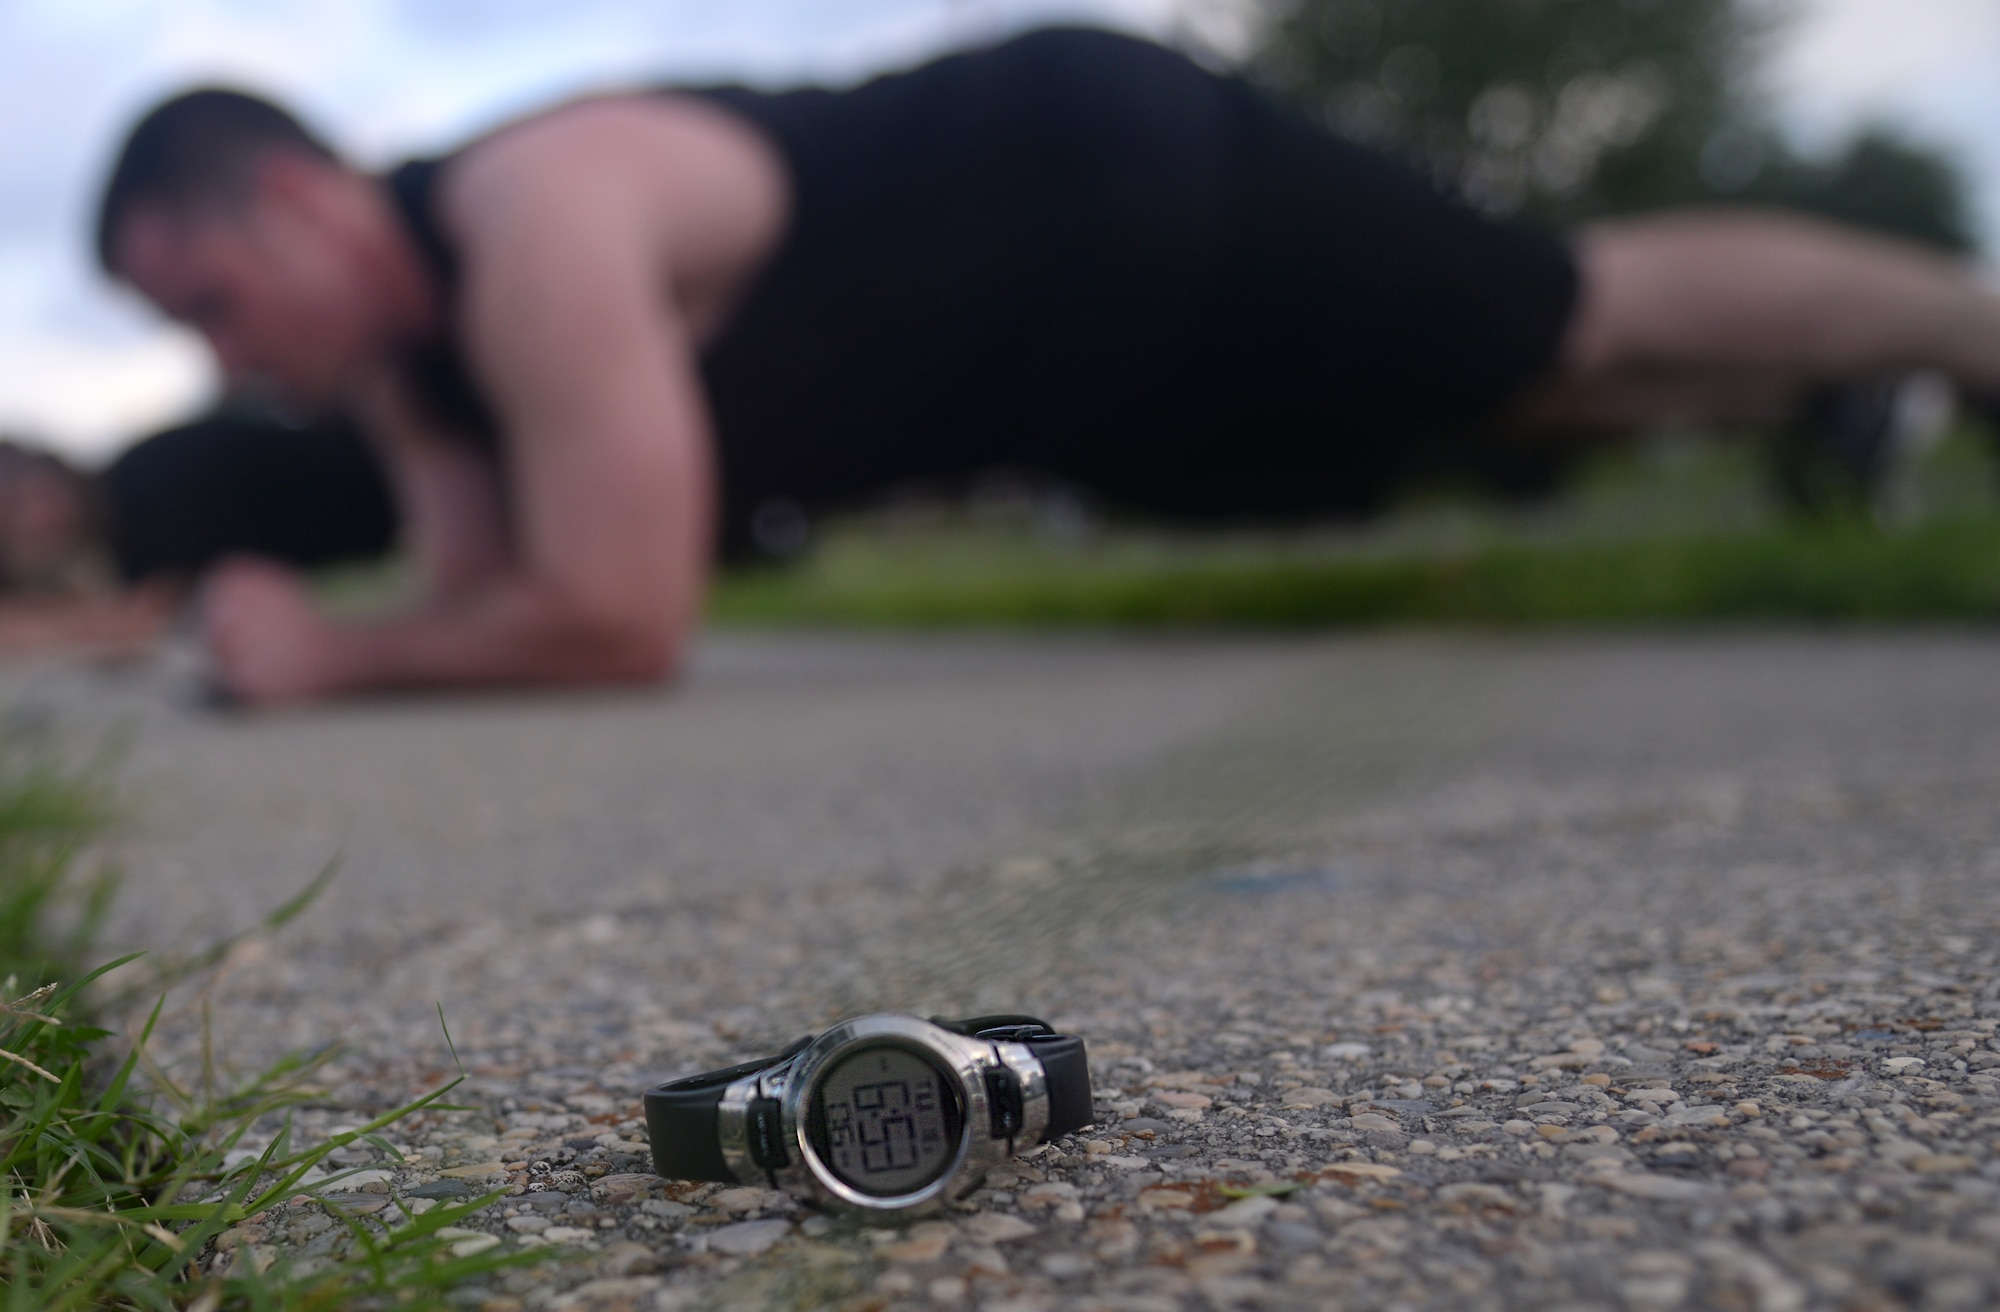 Senior Airman Chimer Clark III, 81st Comptroller Squadron customer service lead, performs a plank as an Airman’s watch lays on the ground timing a minute of planks at physical training, June 16, 2015, Keesler Air Force Base, Miss. The 81st CPTS conducts PT three times a week to build physical strength and foster squadron unity. (U.S. Air Force photo by Senior Airman Holly Mansfield)